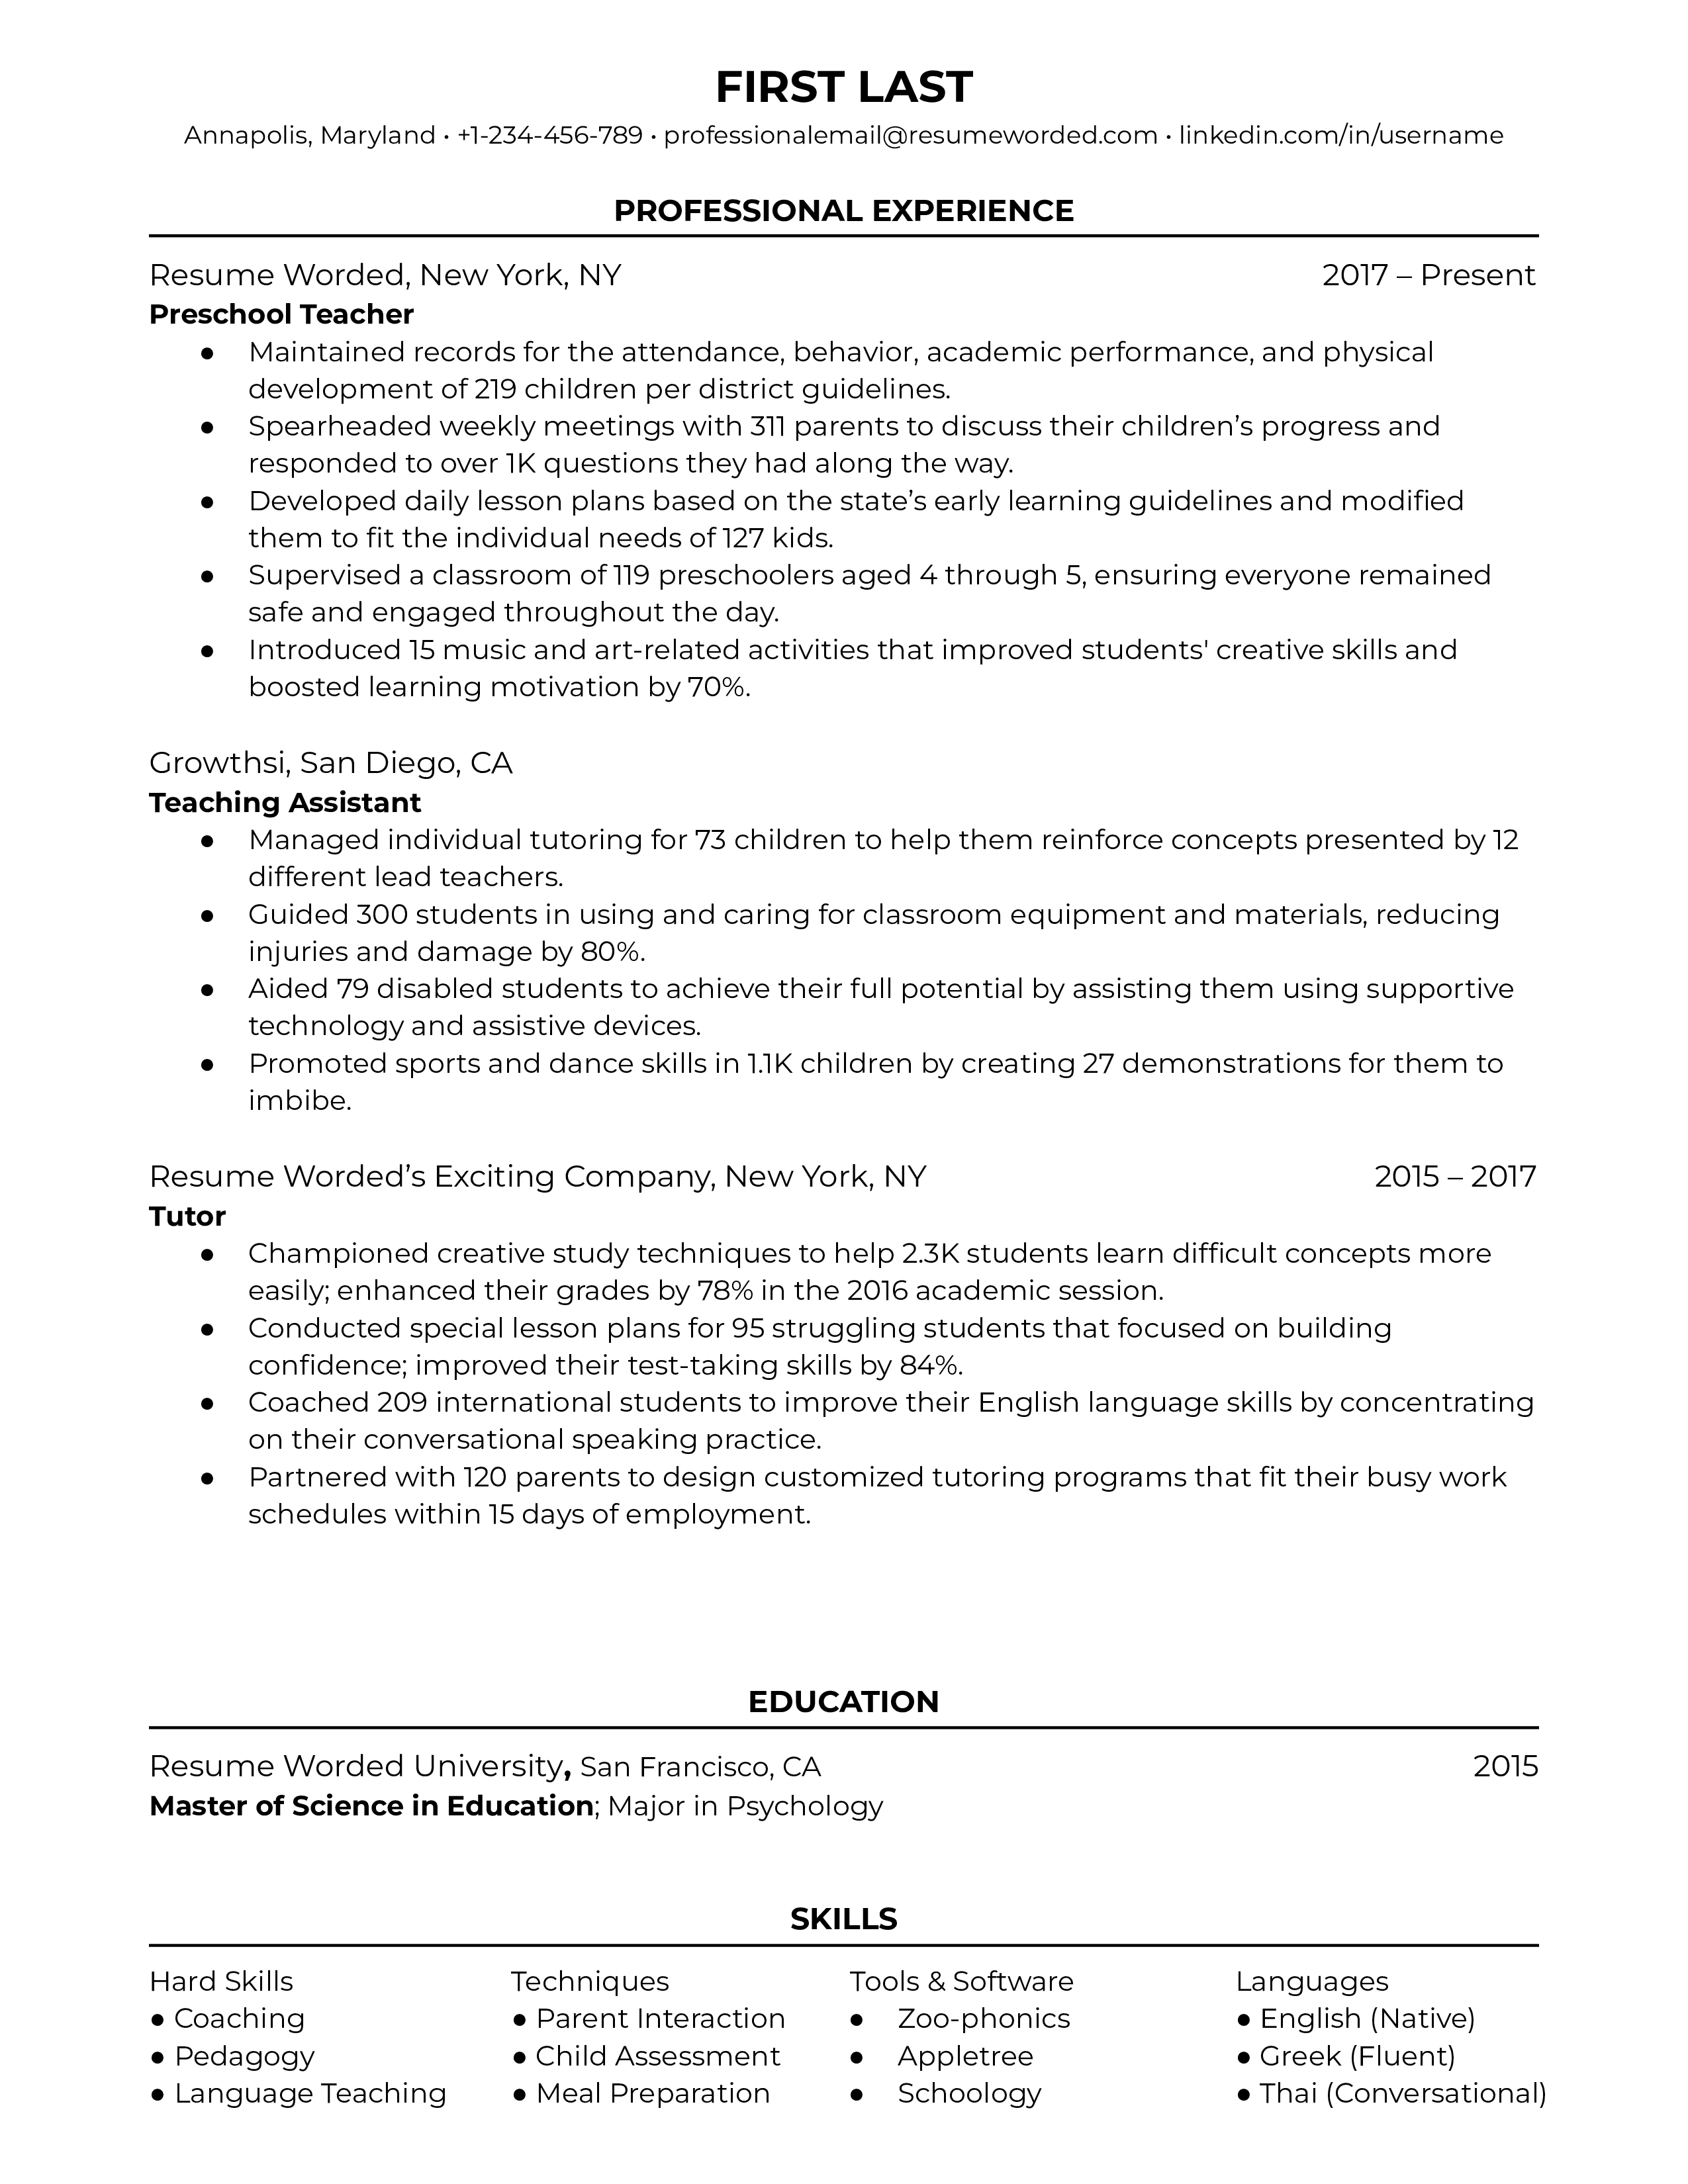 A well-structured CV for preschool teaching roles highlighting unique skills and experiences.